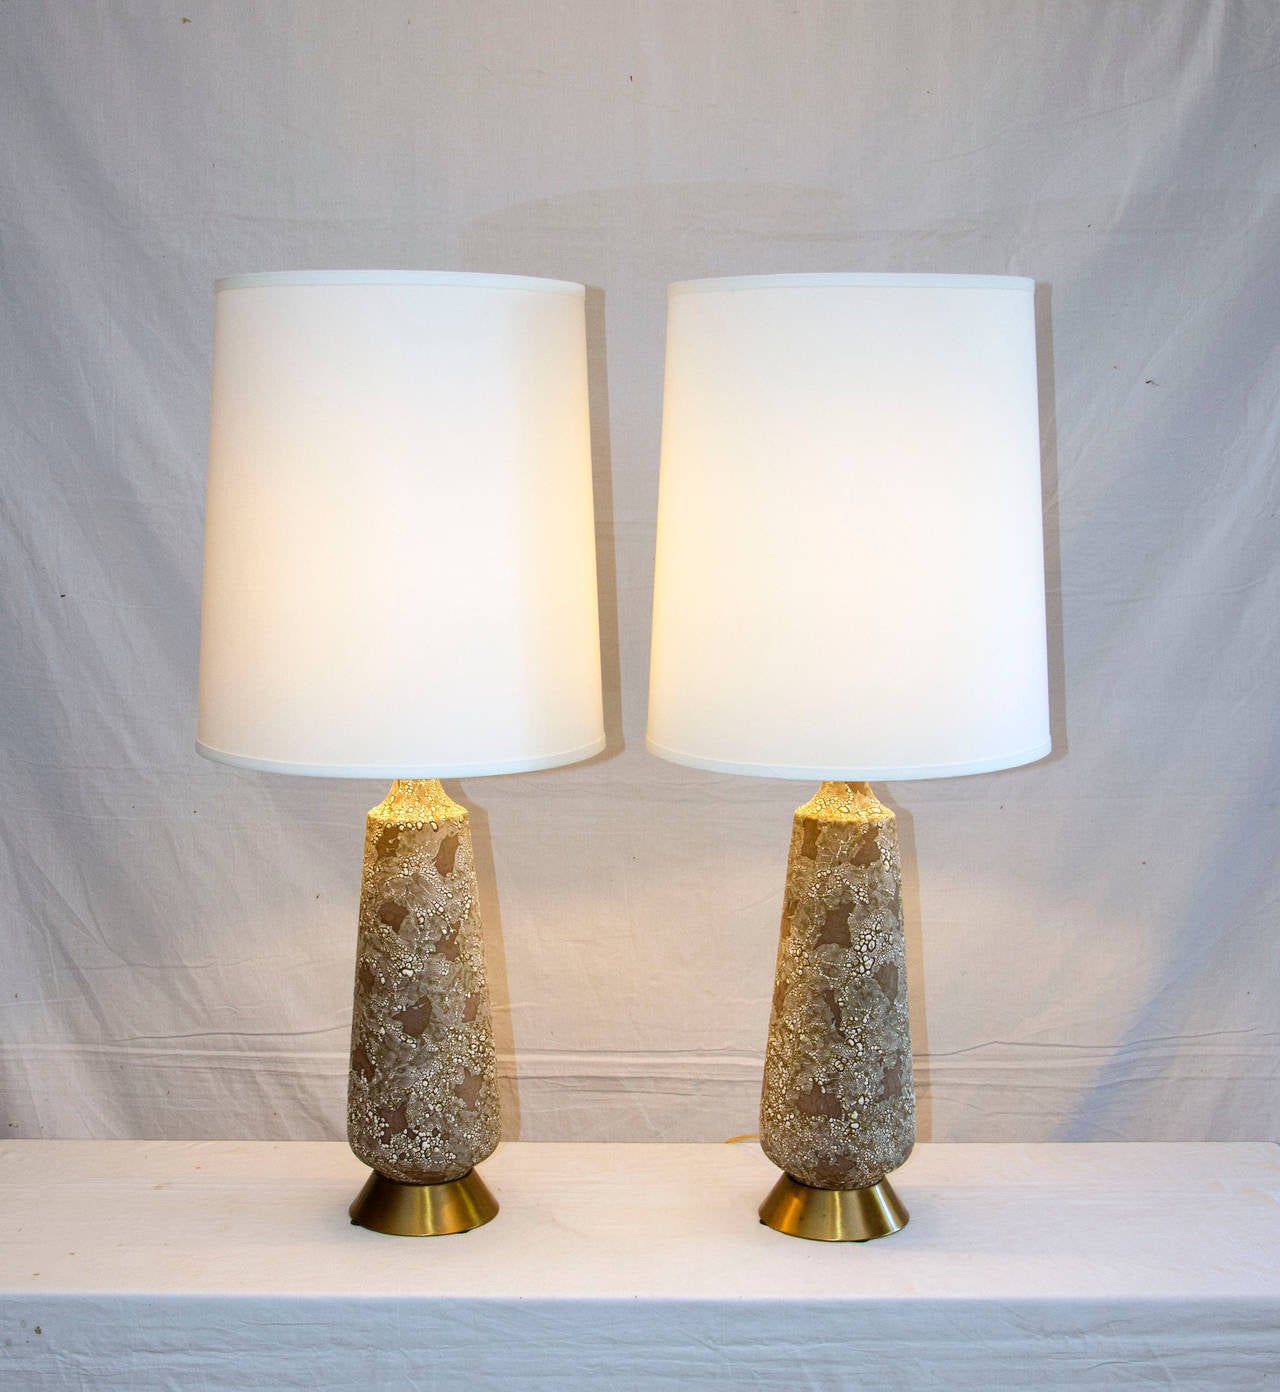 Nice textured ceramic base pair of lamps on the typical muted satin finish brass base. Colors include white, black, grey, greyish brown. Original manufacturers tags still attached where cord exits base "Navis and Smith Co. Chicago,